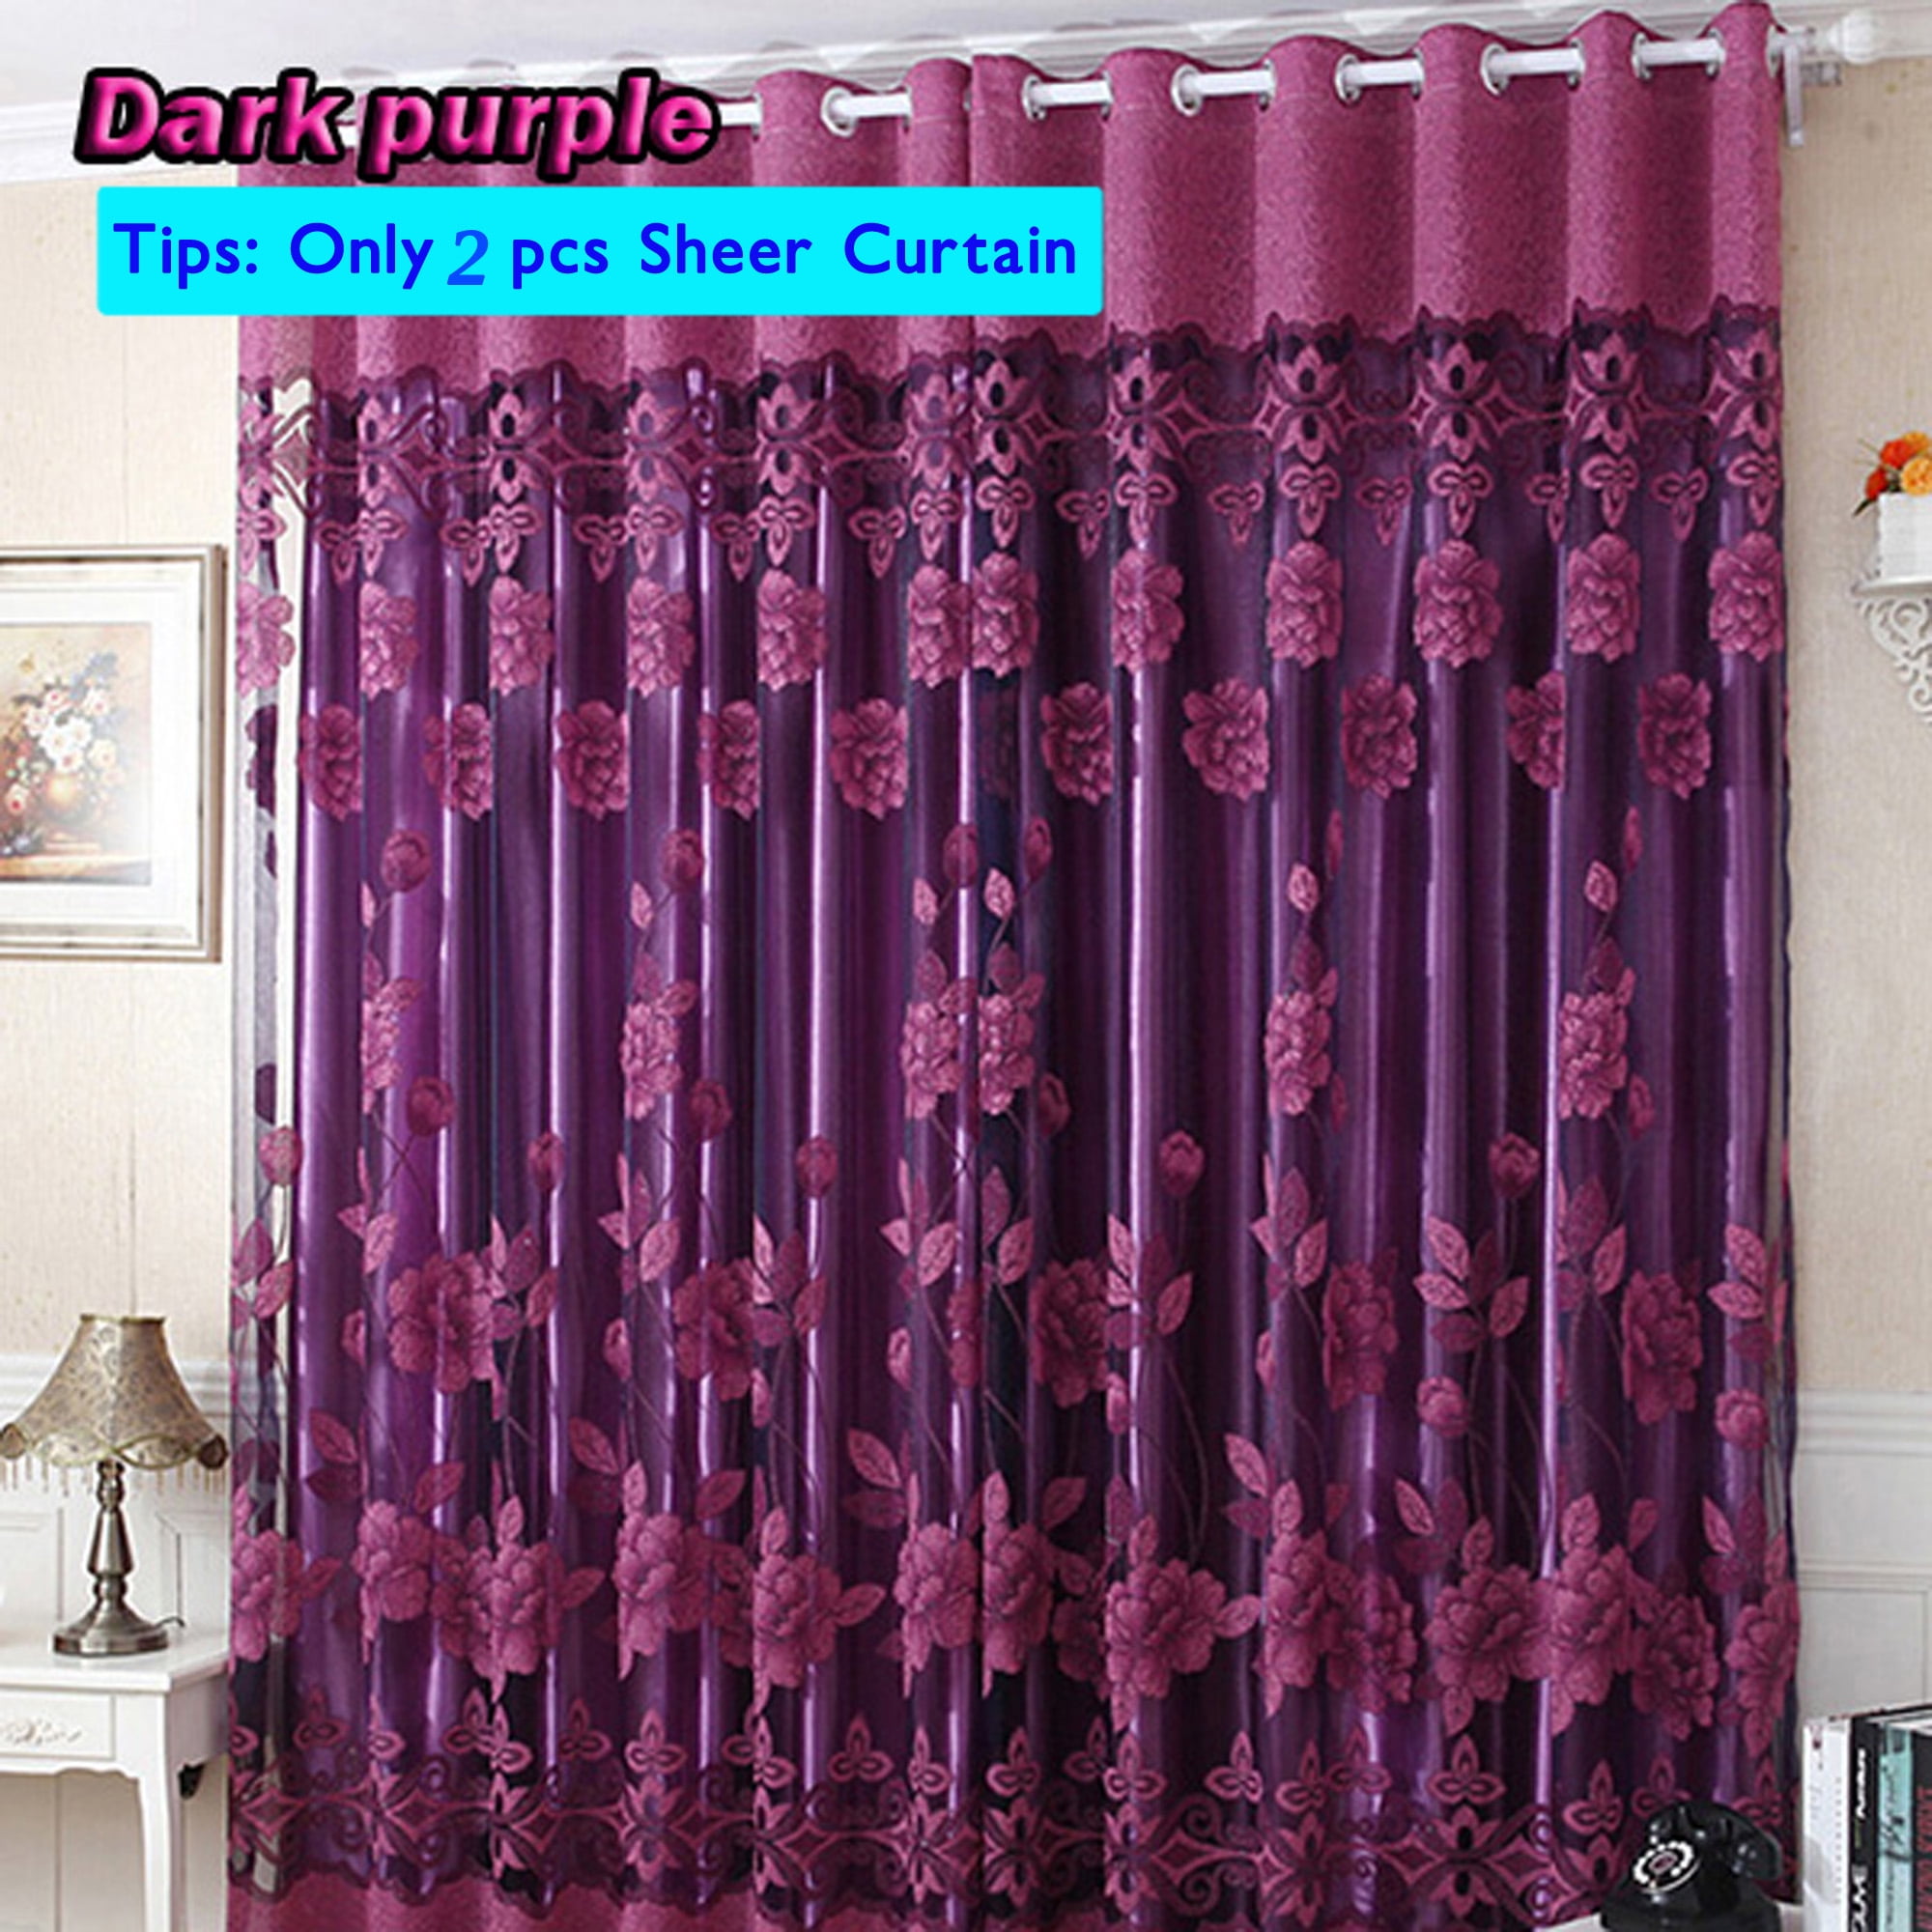 Floral Window Curtain Living Room Decoration Door Wall Drape Home Valances Voile